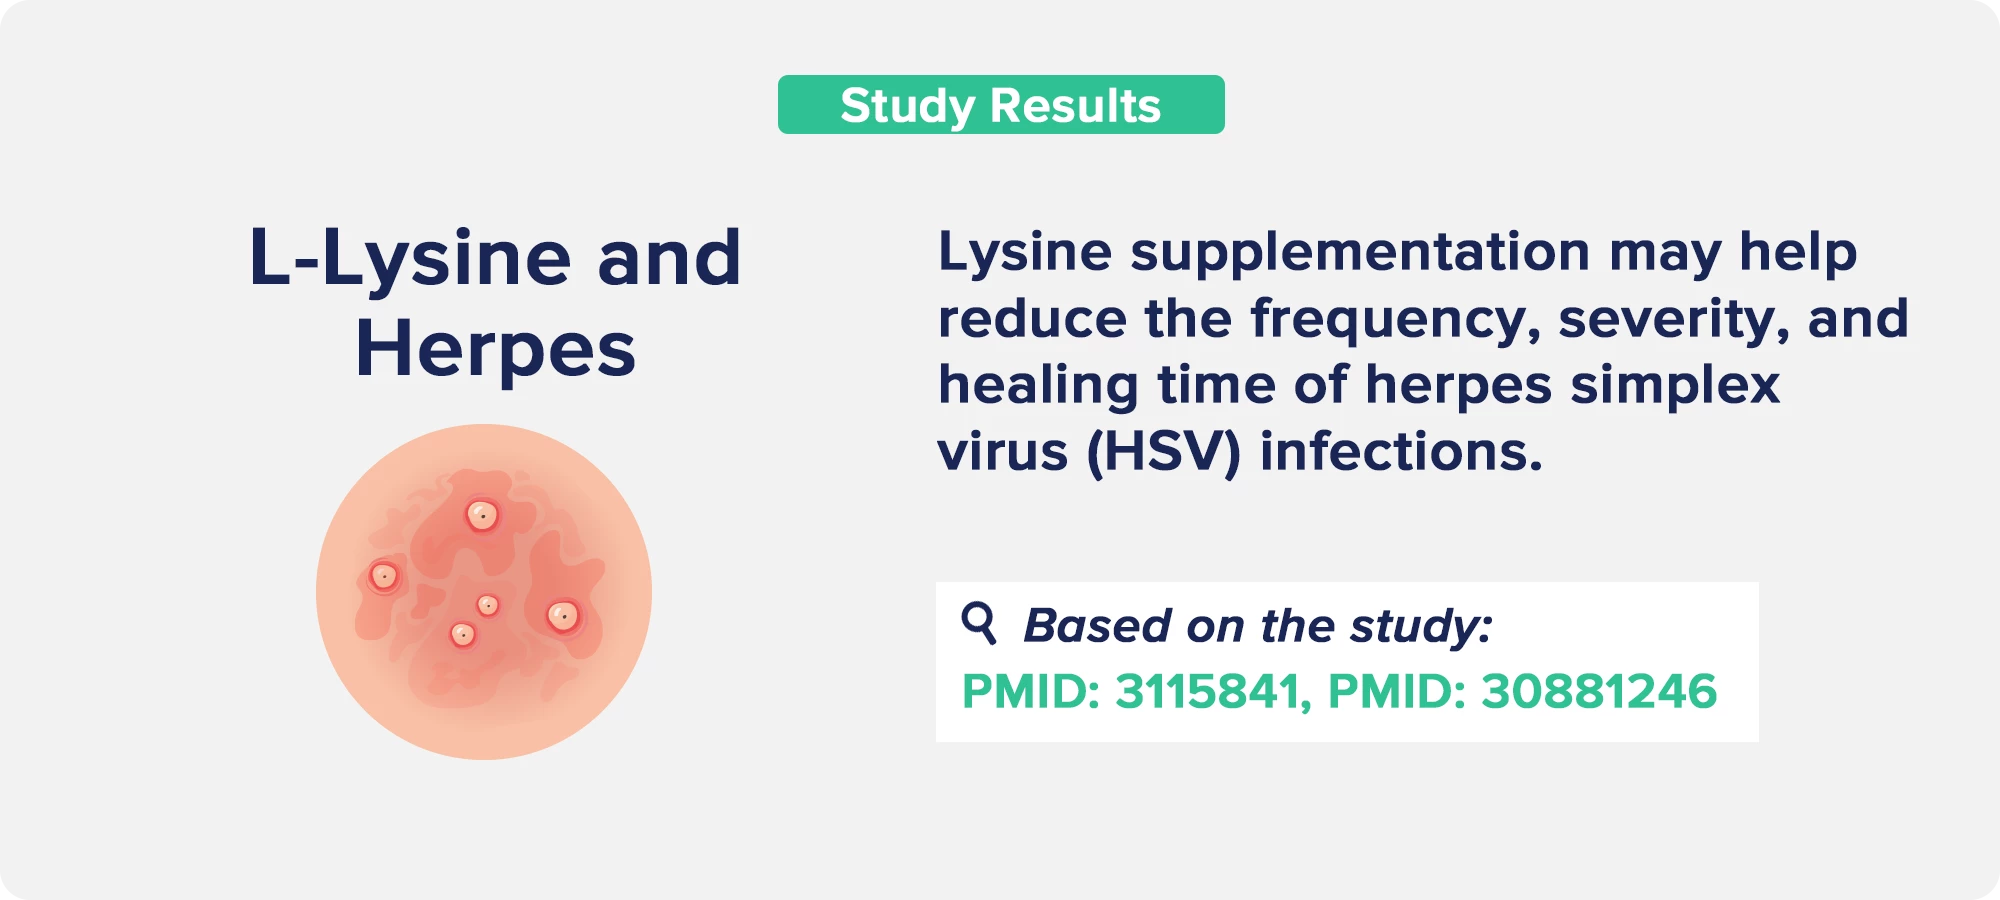 L-Lysine and Herpes